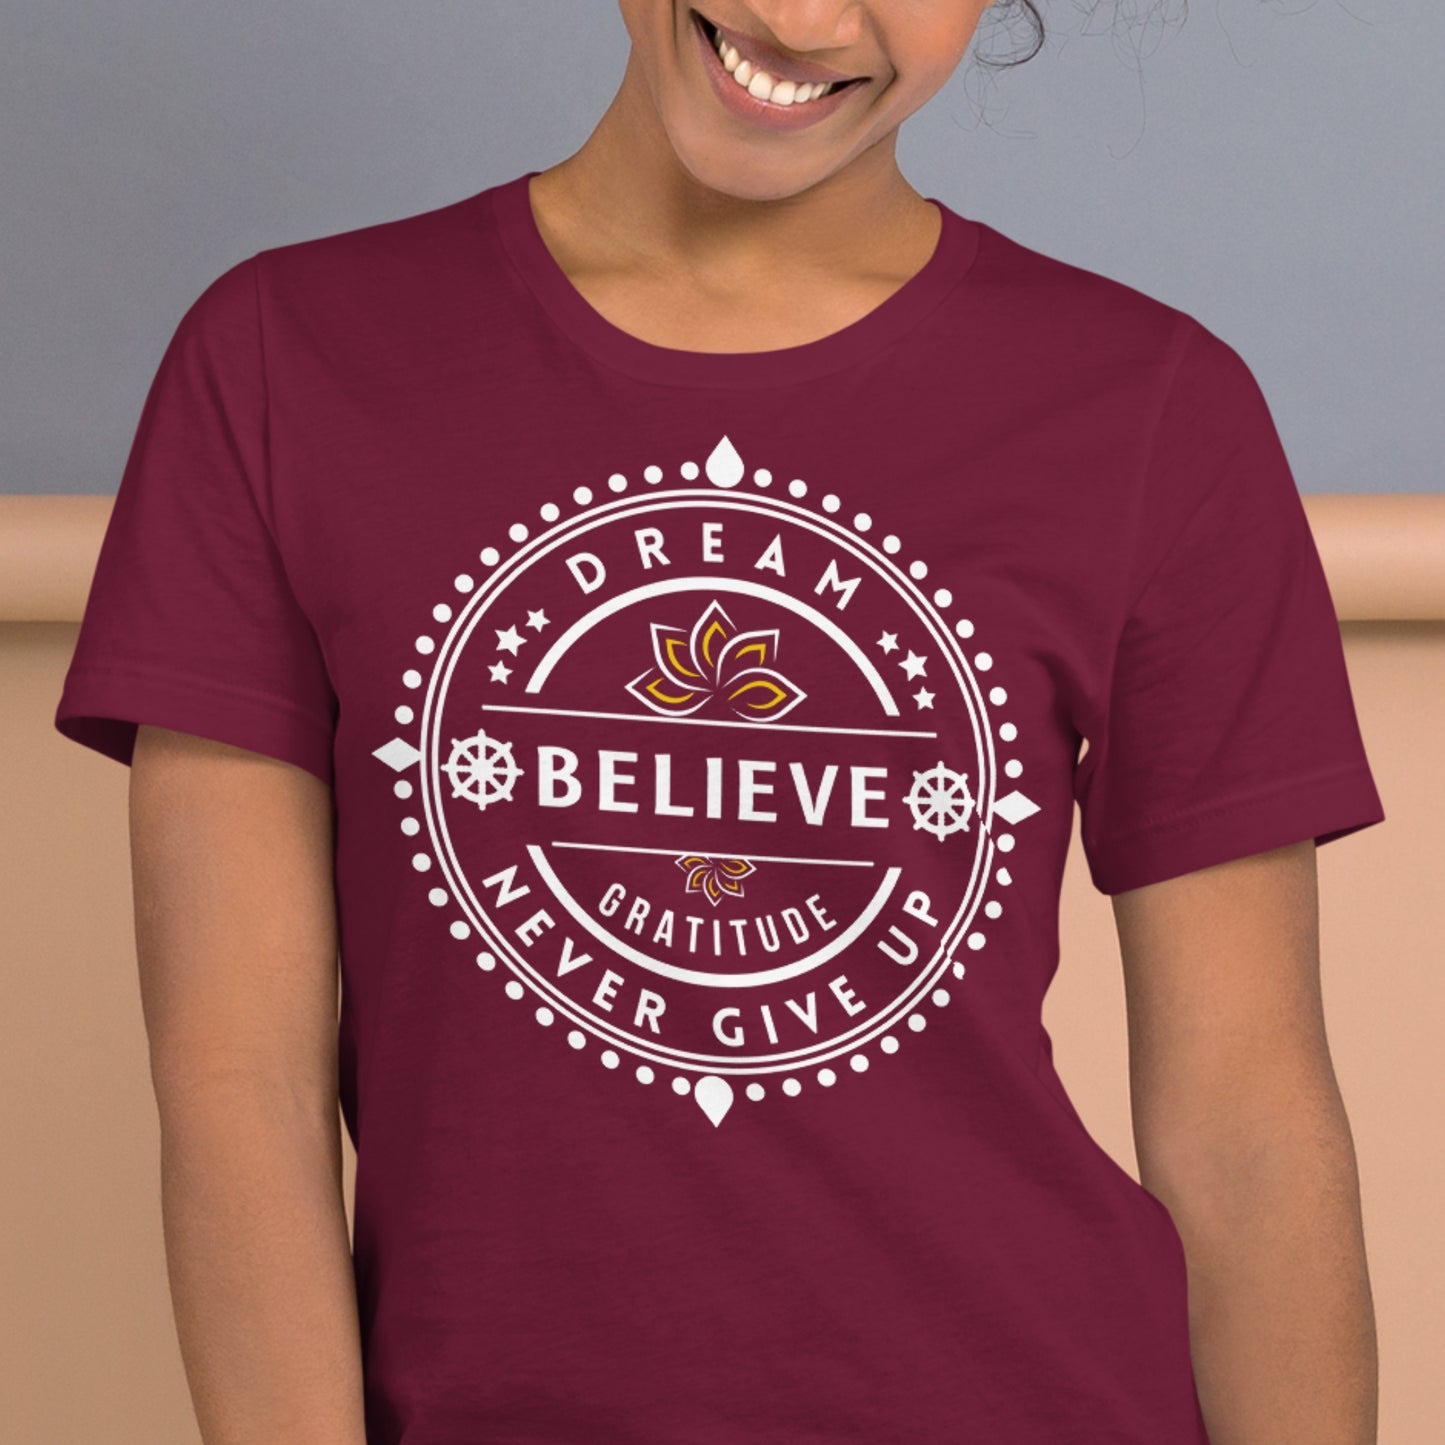 Mindful Living with Attitude T-shirt